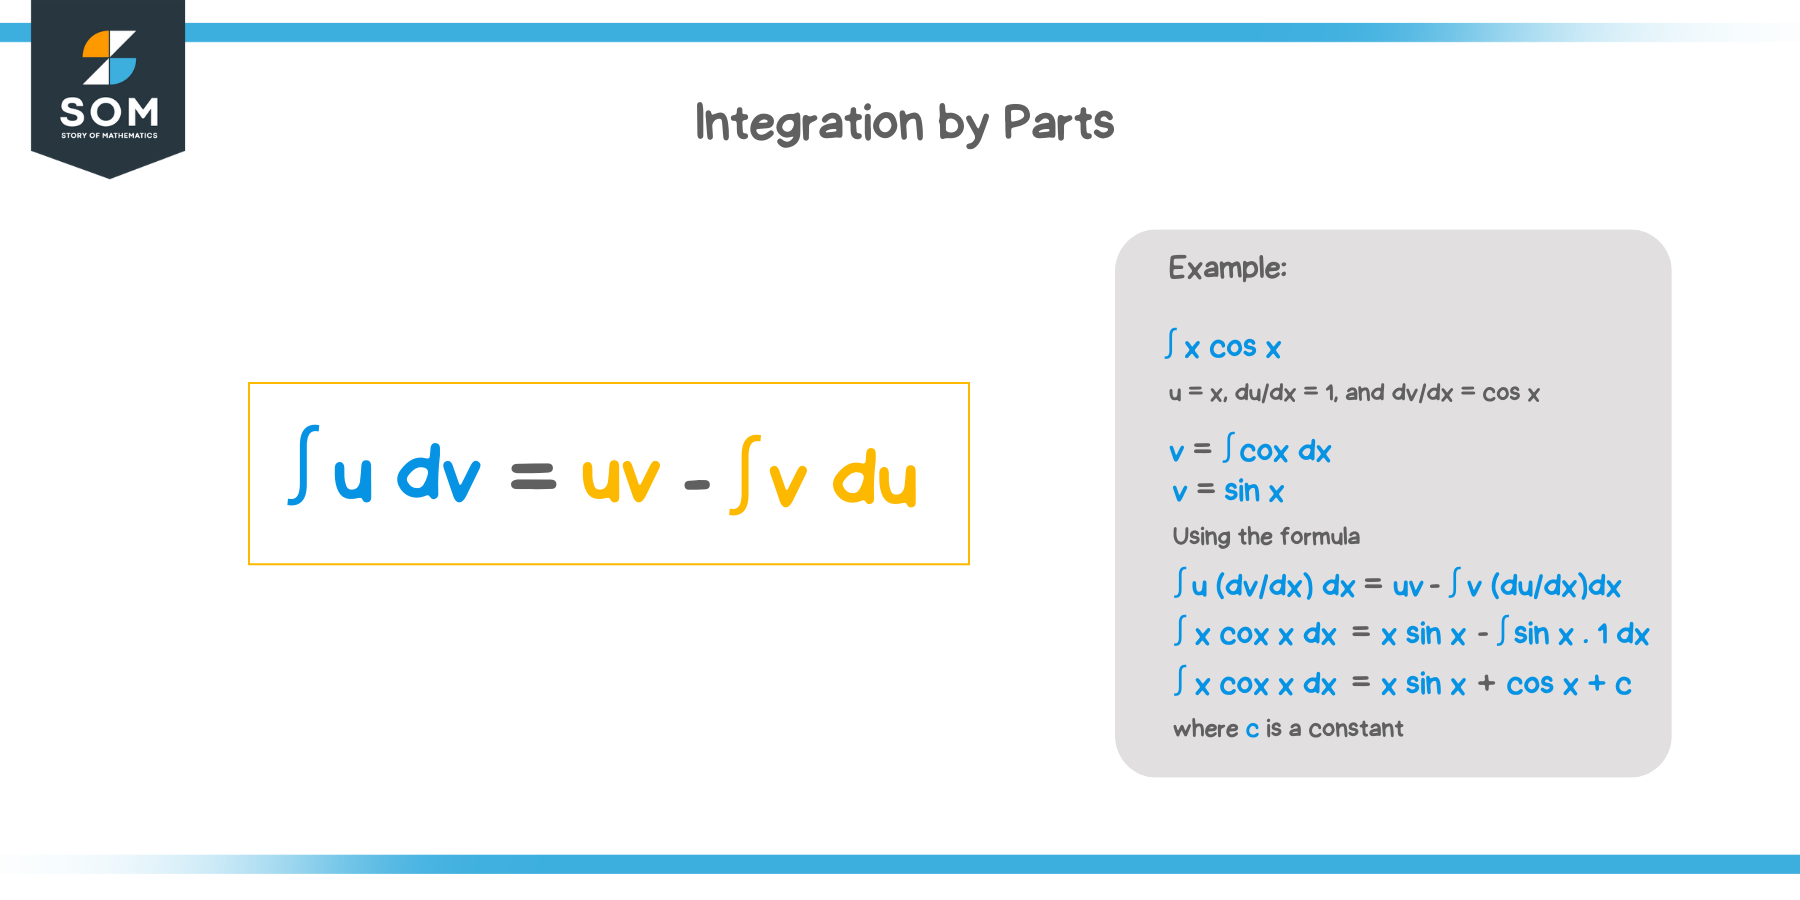 What is integration by parts?